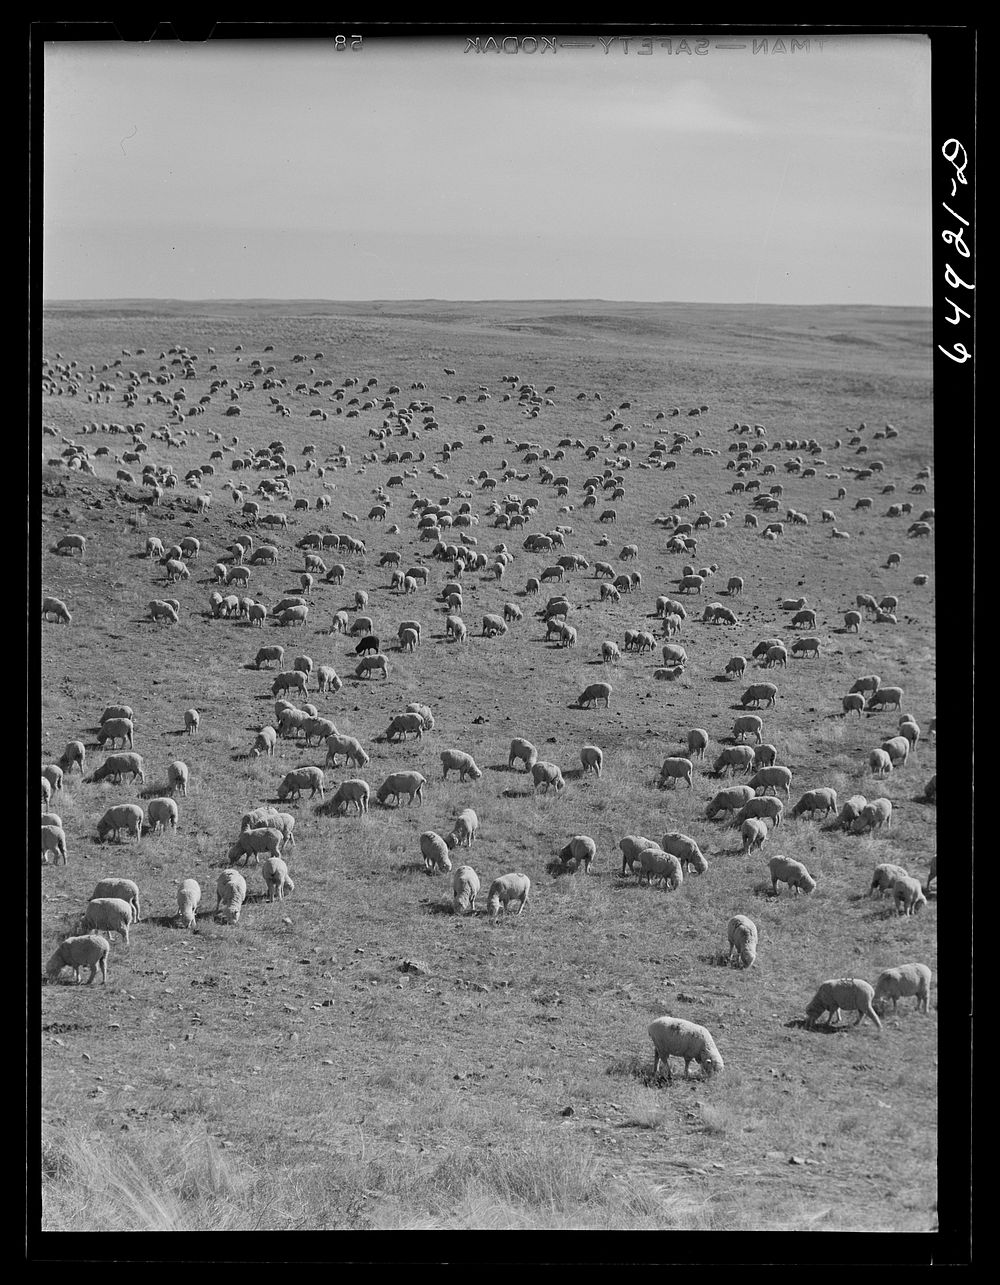 McCone County, Montana. Sheep grazing on land leased from the railroad. Sourced from the Library of Congress.